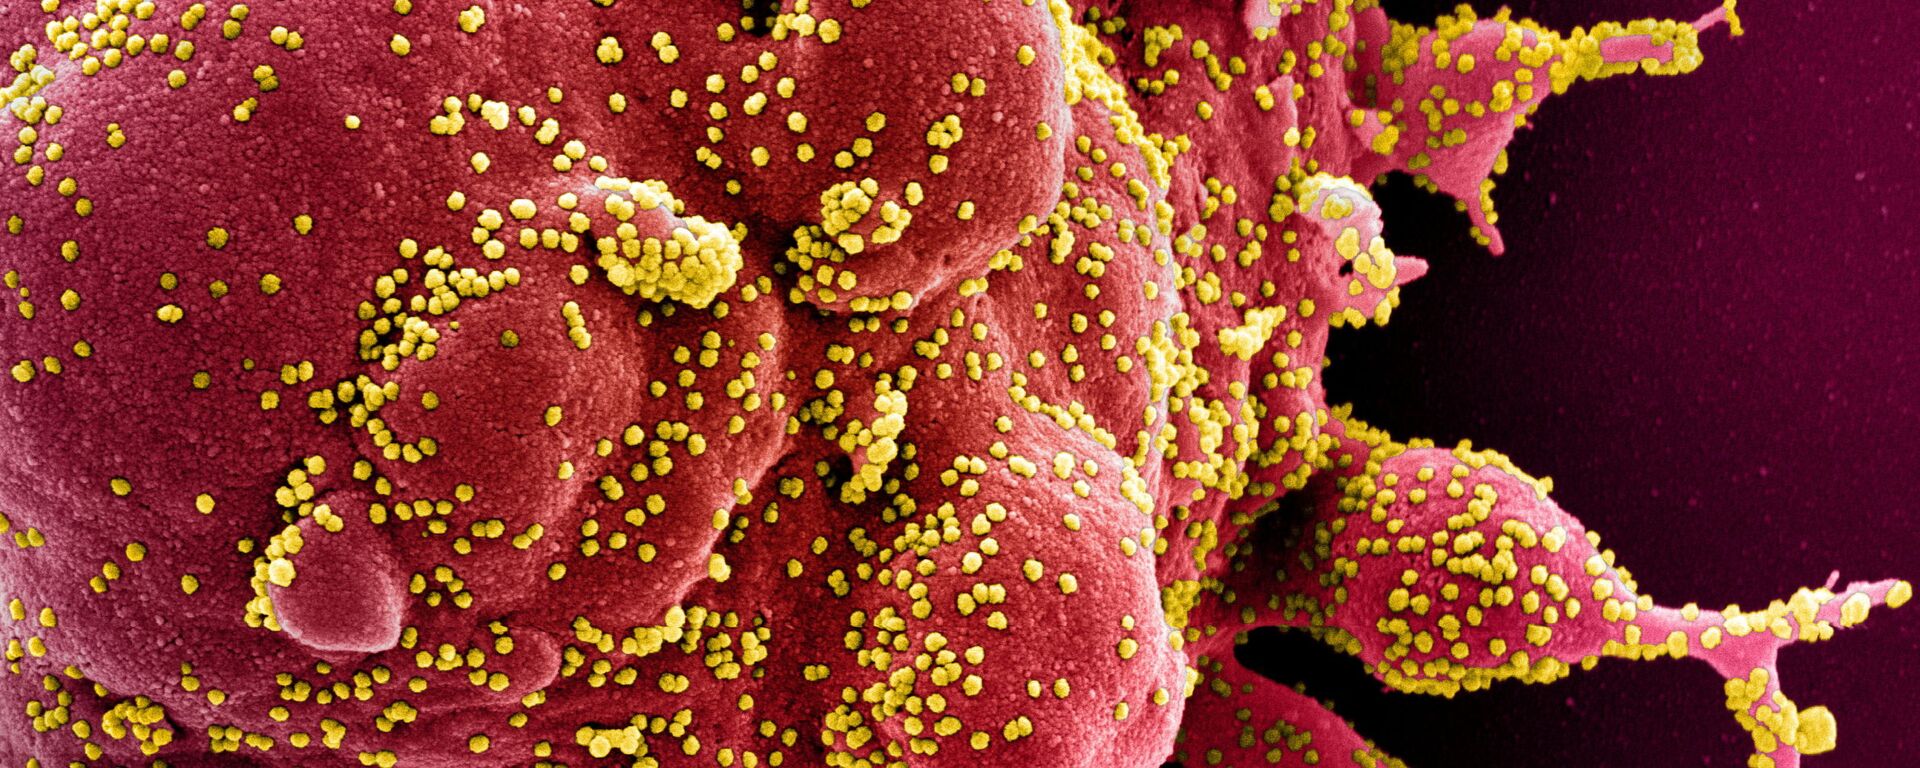 Colorized scanning electron micrograph of an apoptotic cell (red) infected with SARS-COV-2 virus particles (yellow), also known as novel coronavirus, isolated from a patient sample. Image captured at the NIAID Integrated Research Facility (IRF) in Fort Detrick, Maryland - Sputnik International, 1920, 07.09.2021